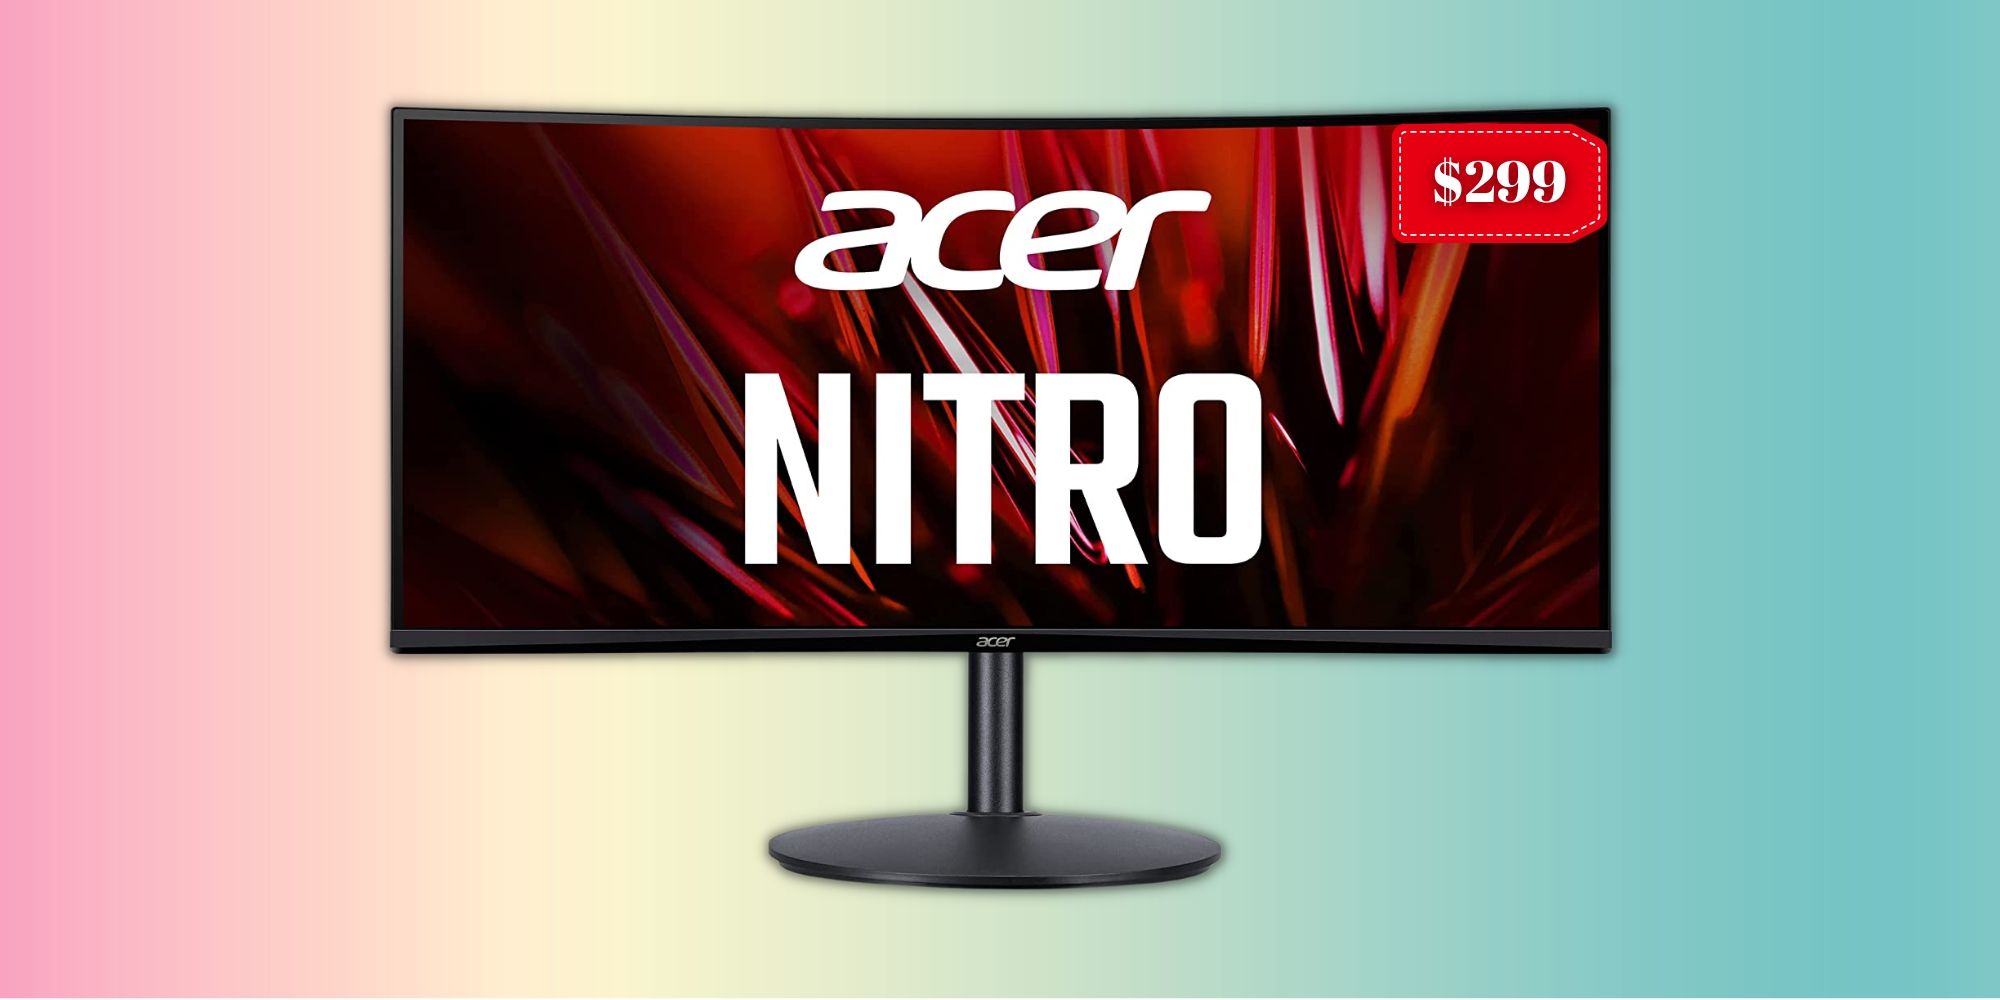 34-inch Acer Nitro curved gaming monitor over a gradient background